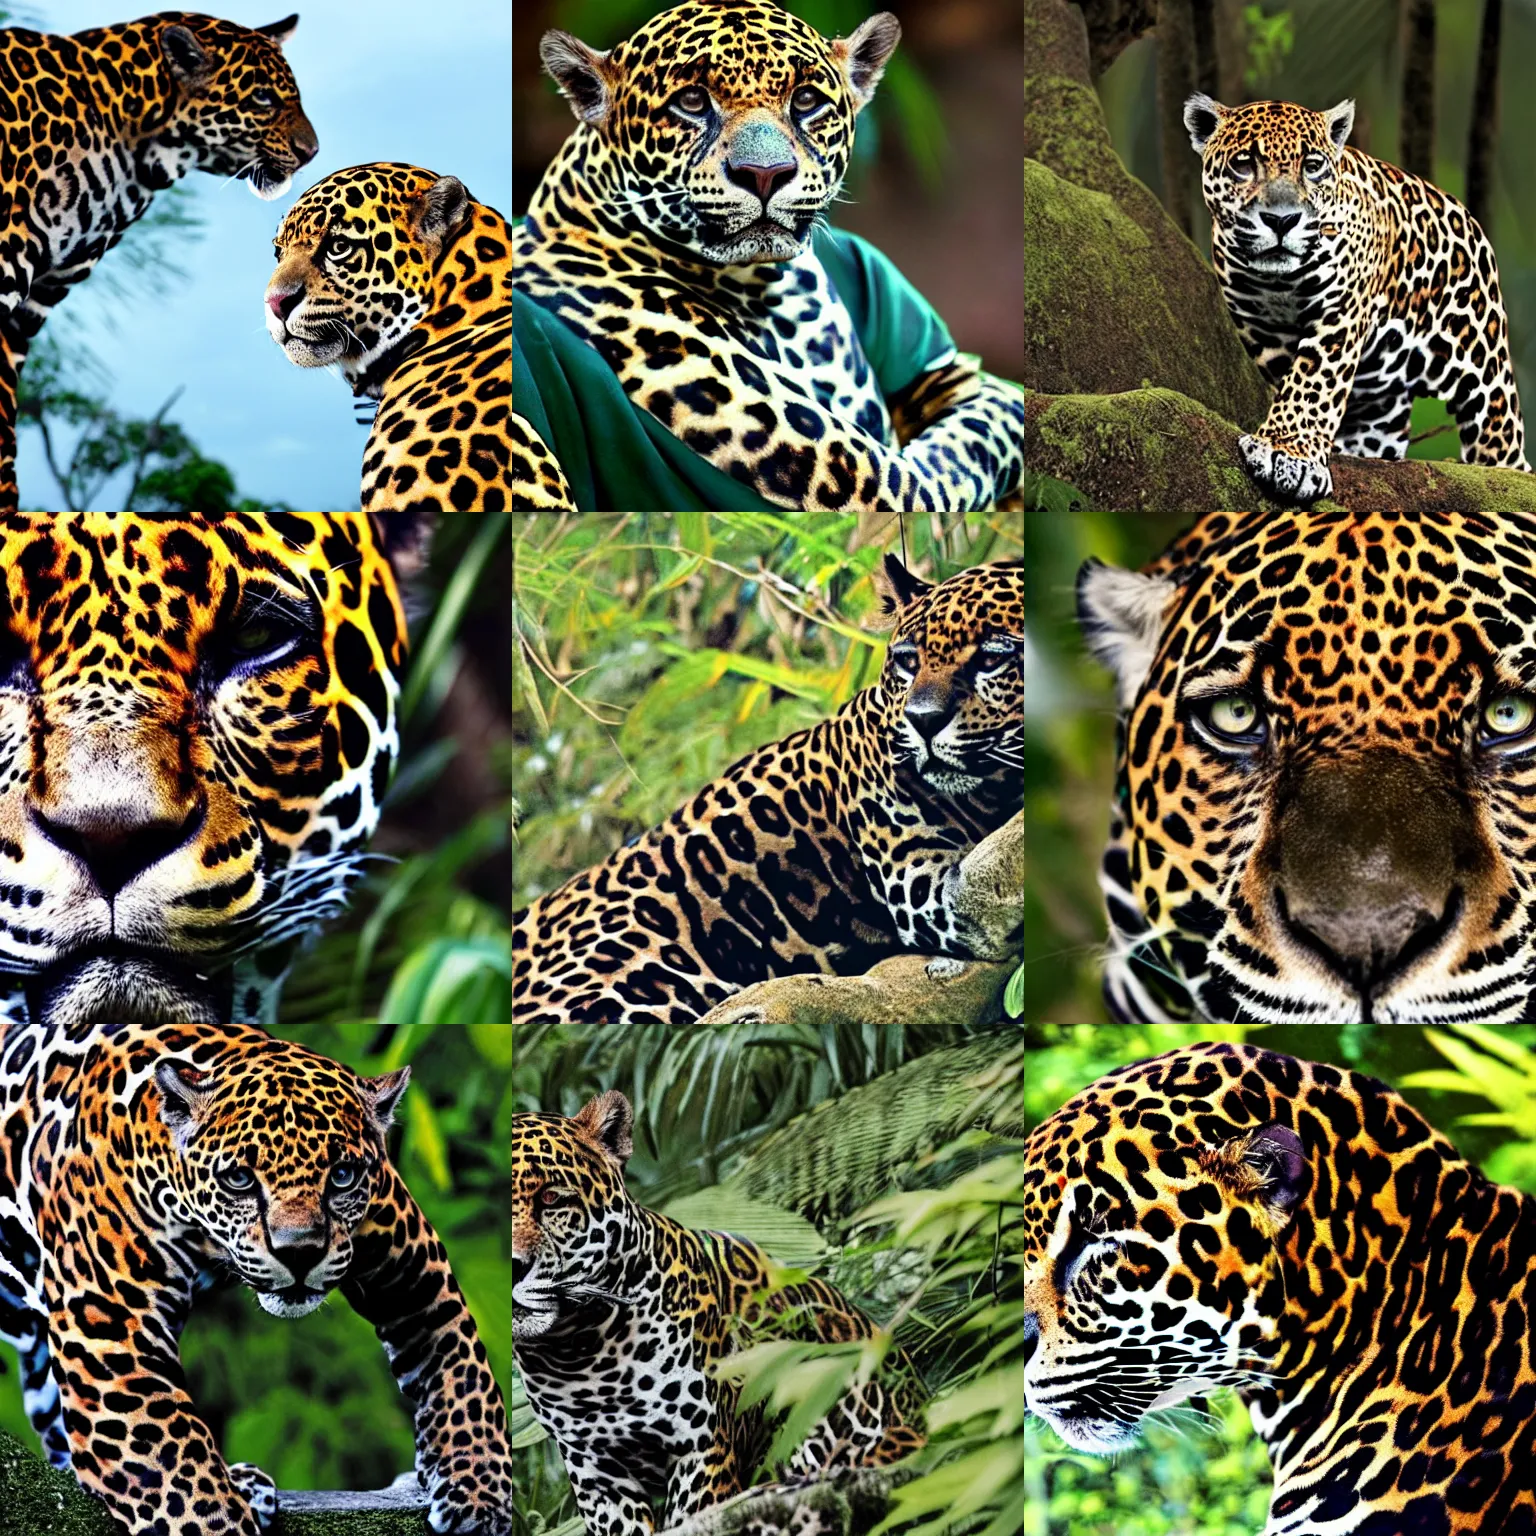 Prompt: A jaguar man, the CEO of the Pan-Amazonian Corporate Reserve (est. 2047), ponders his next move